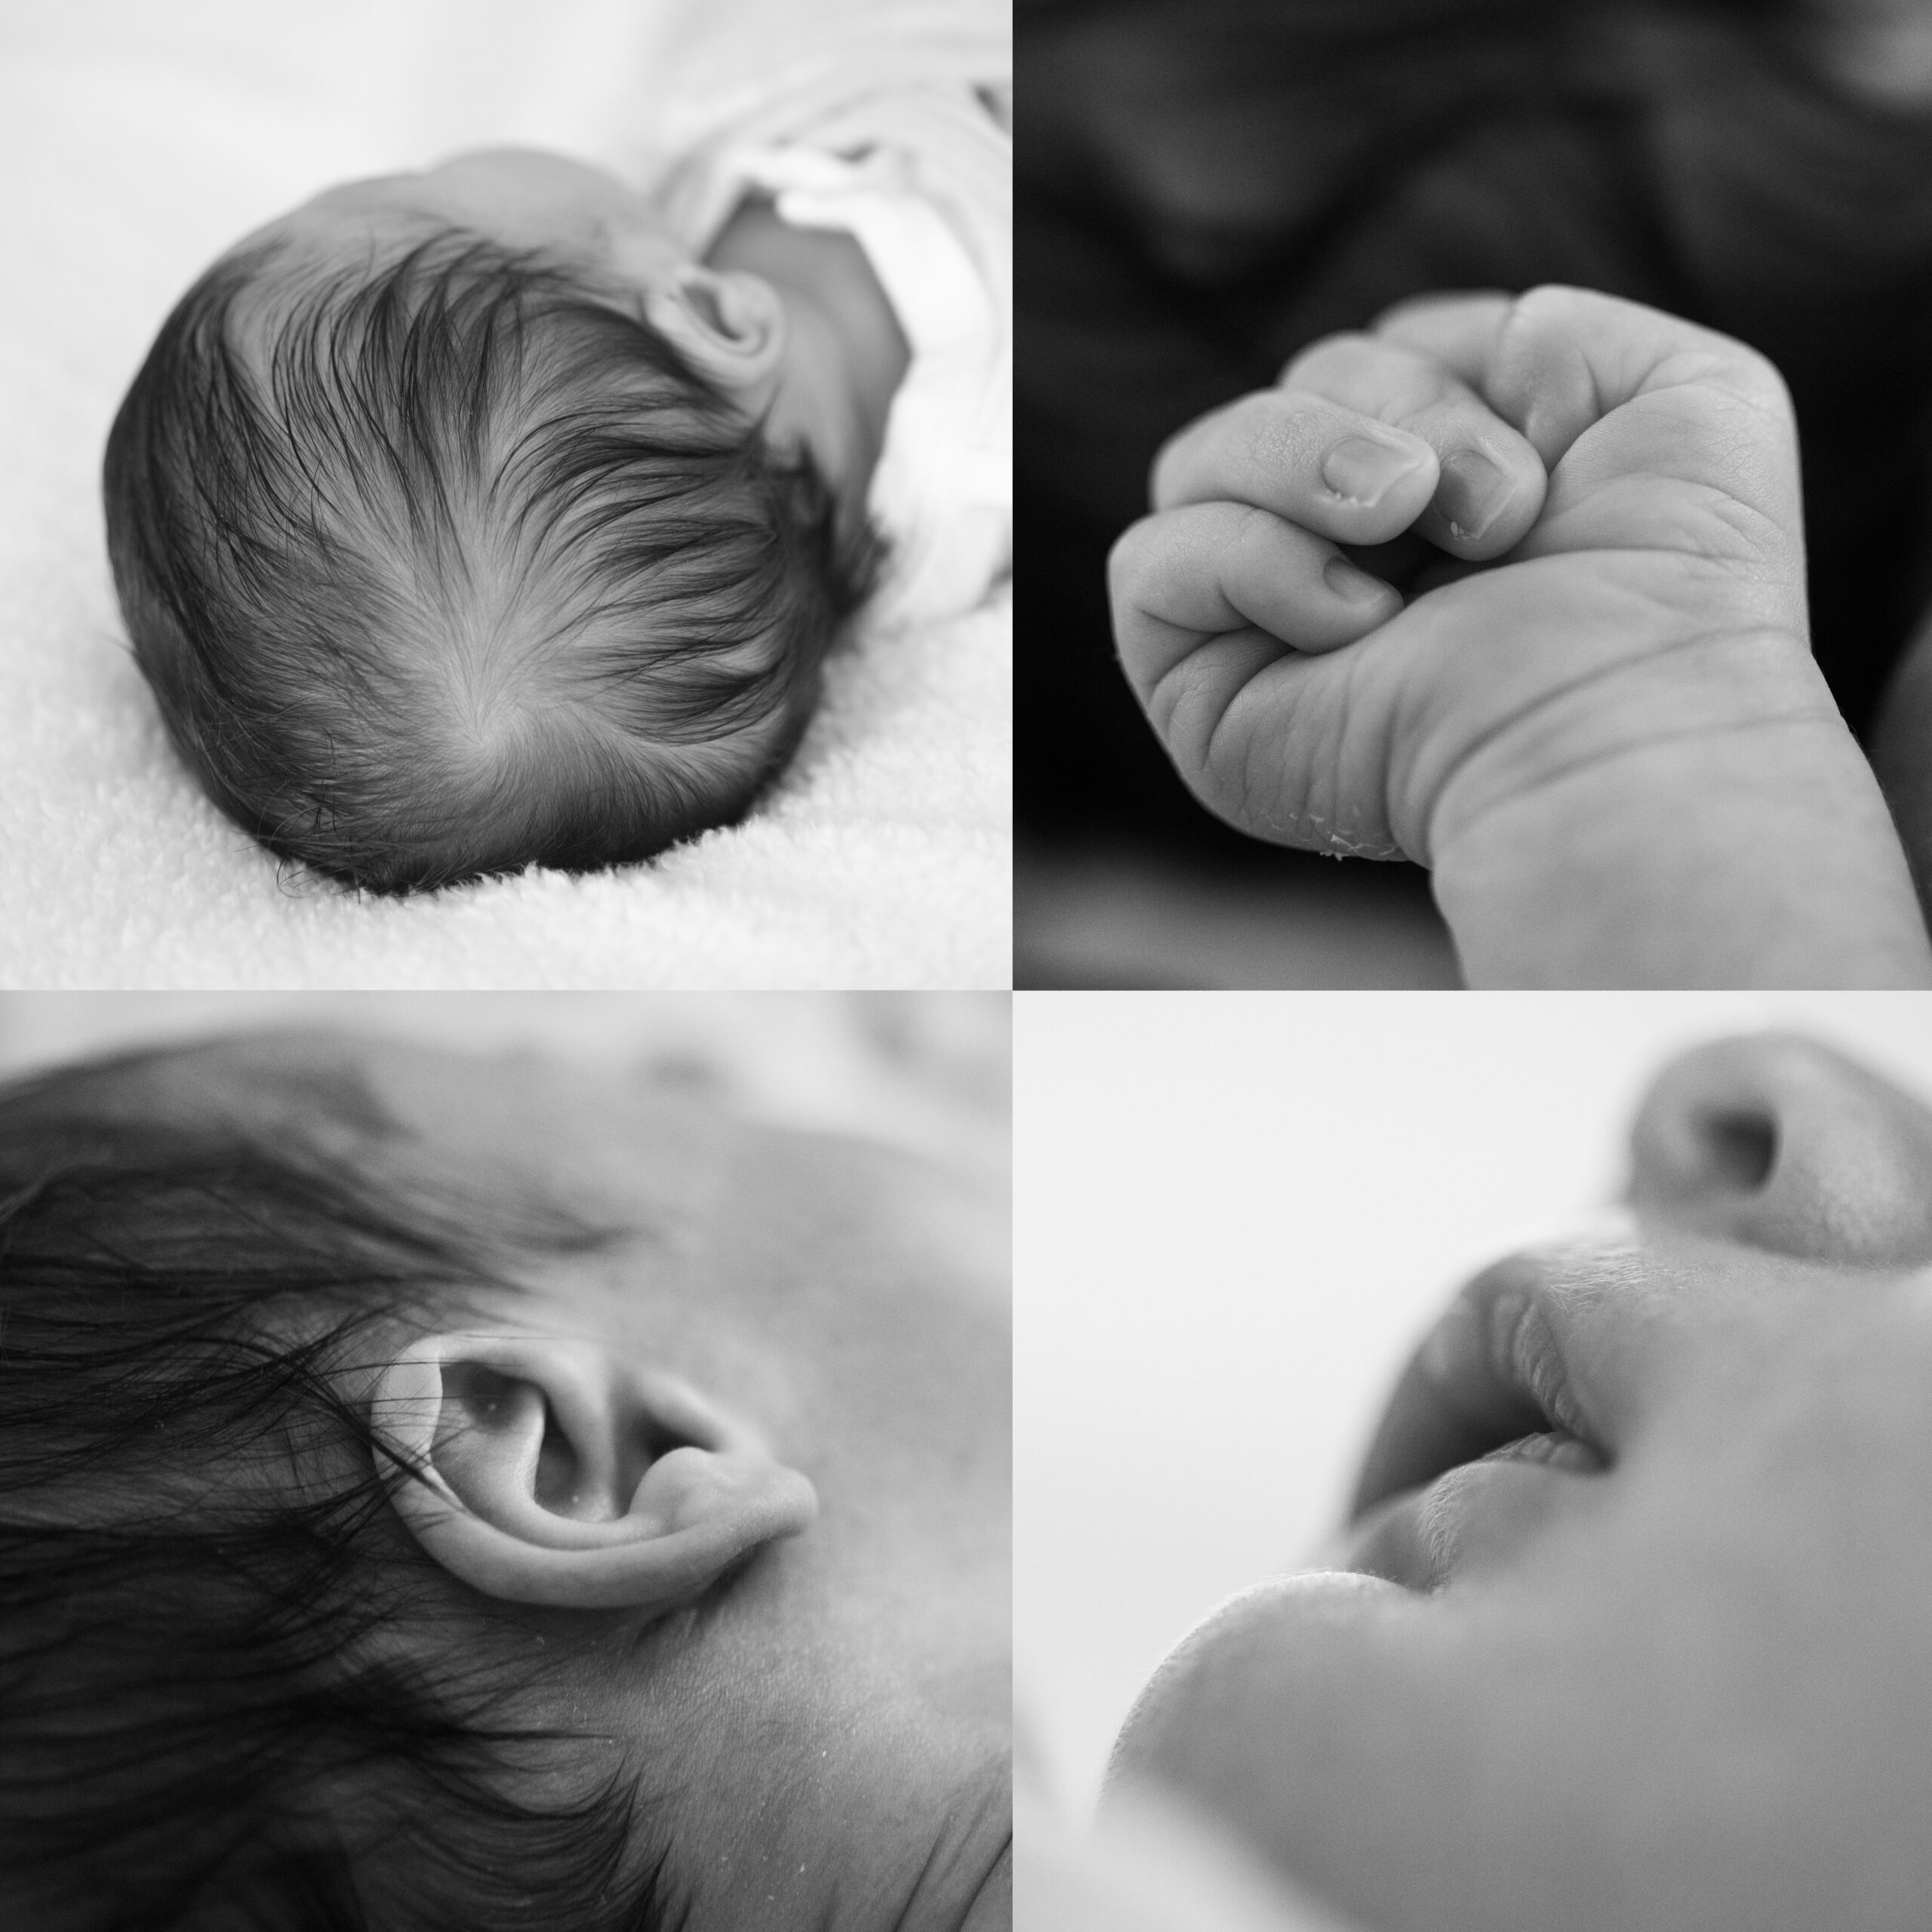 Newborn photoshoot details and closeups of baby's hair fingers ear and lips